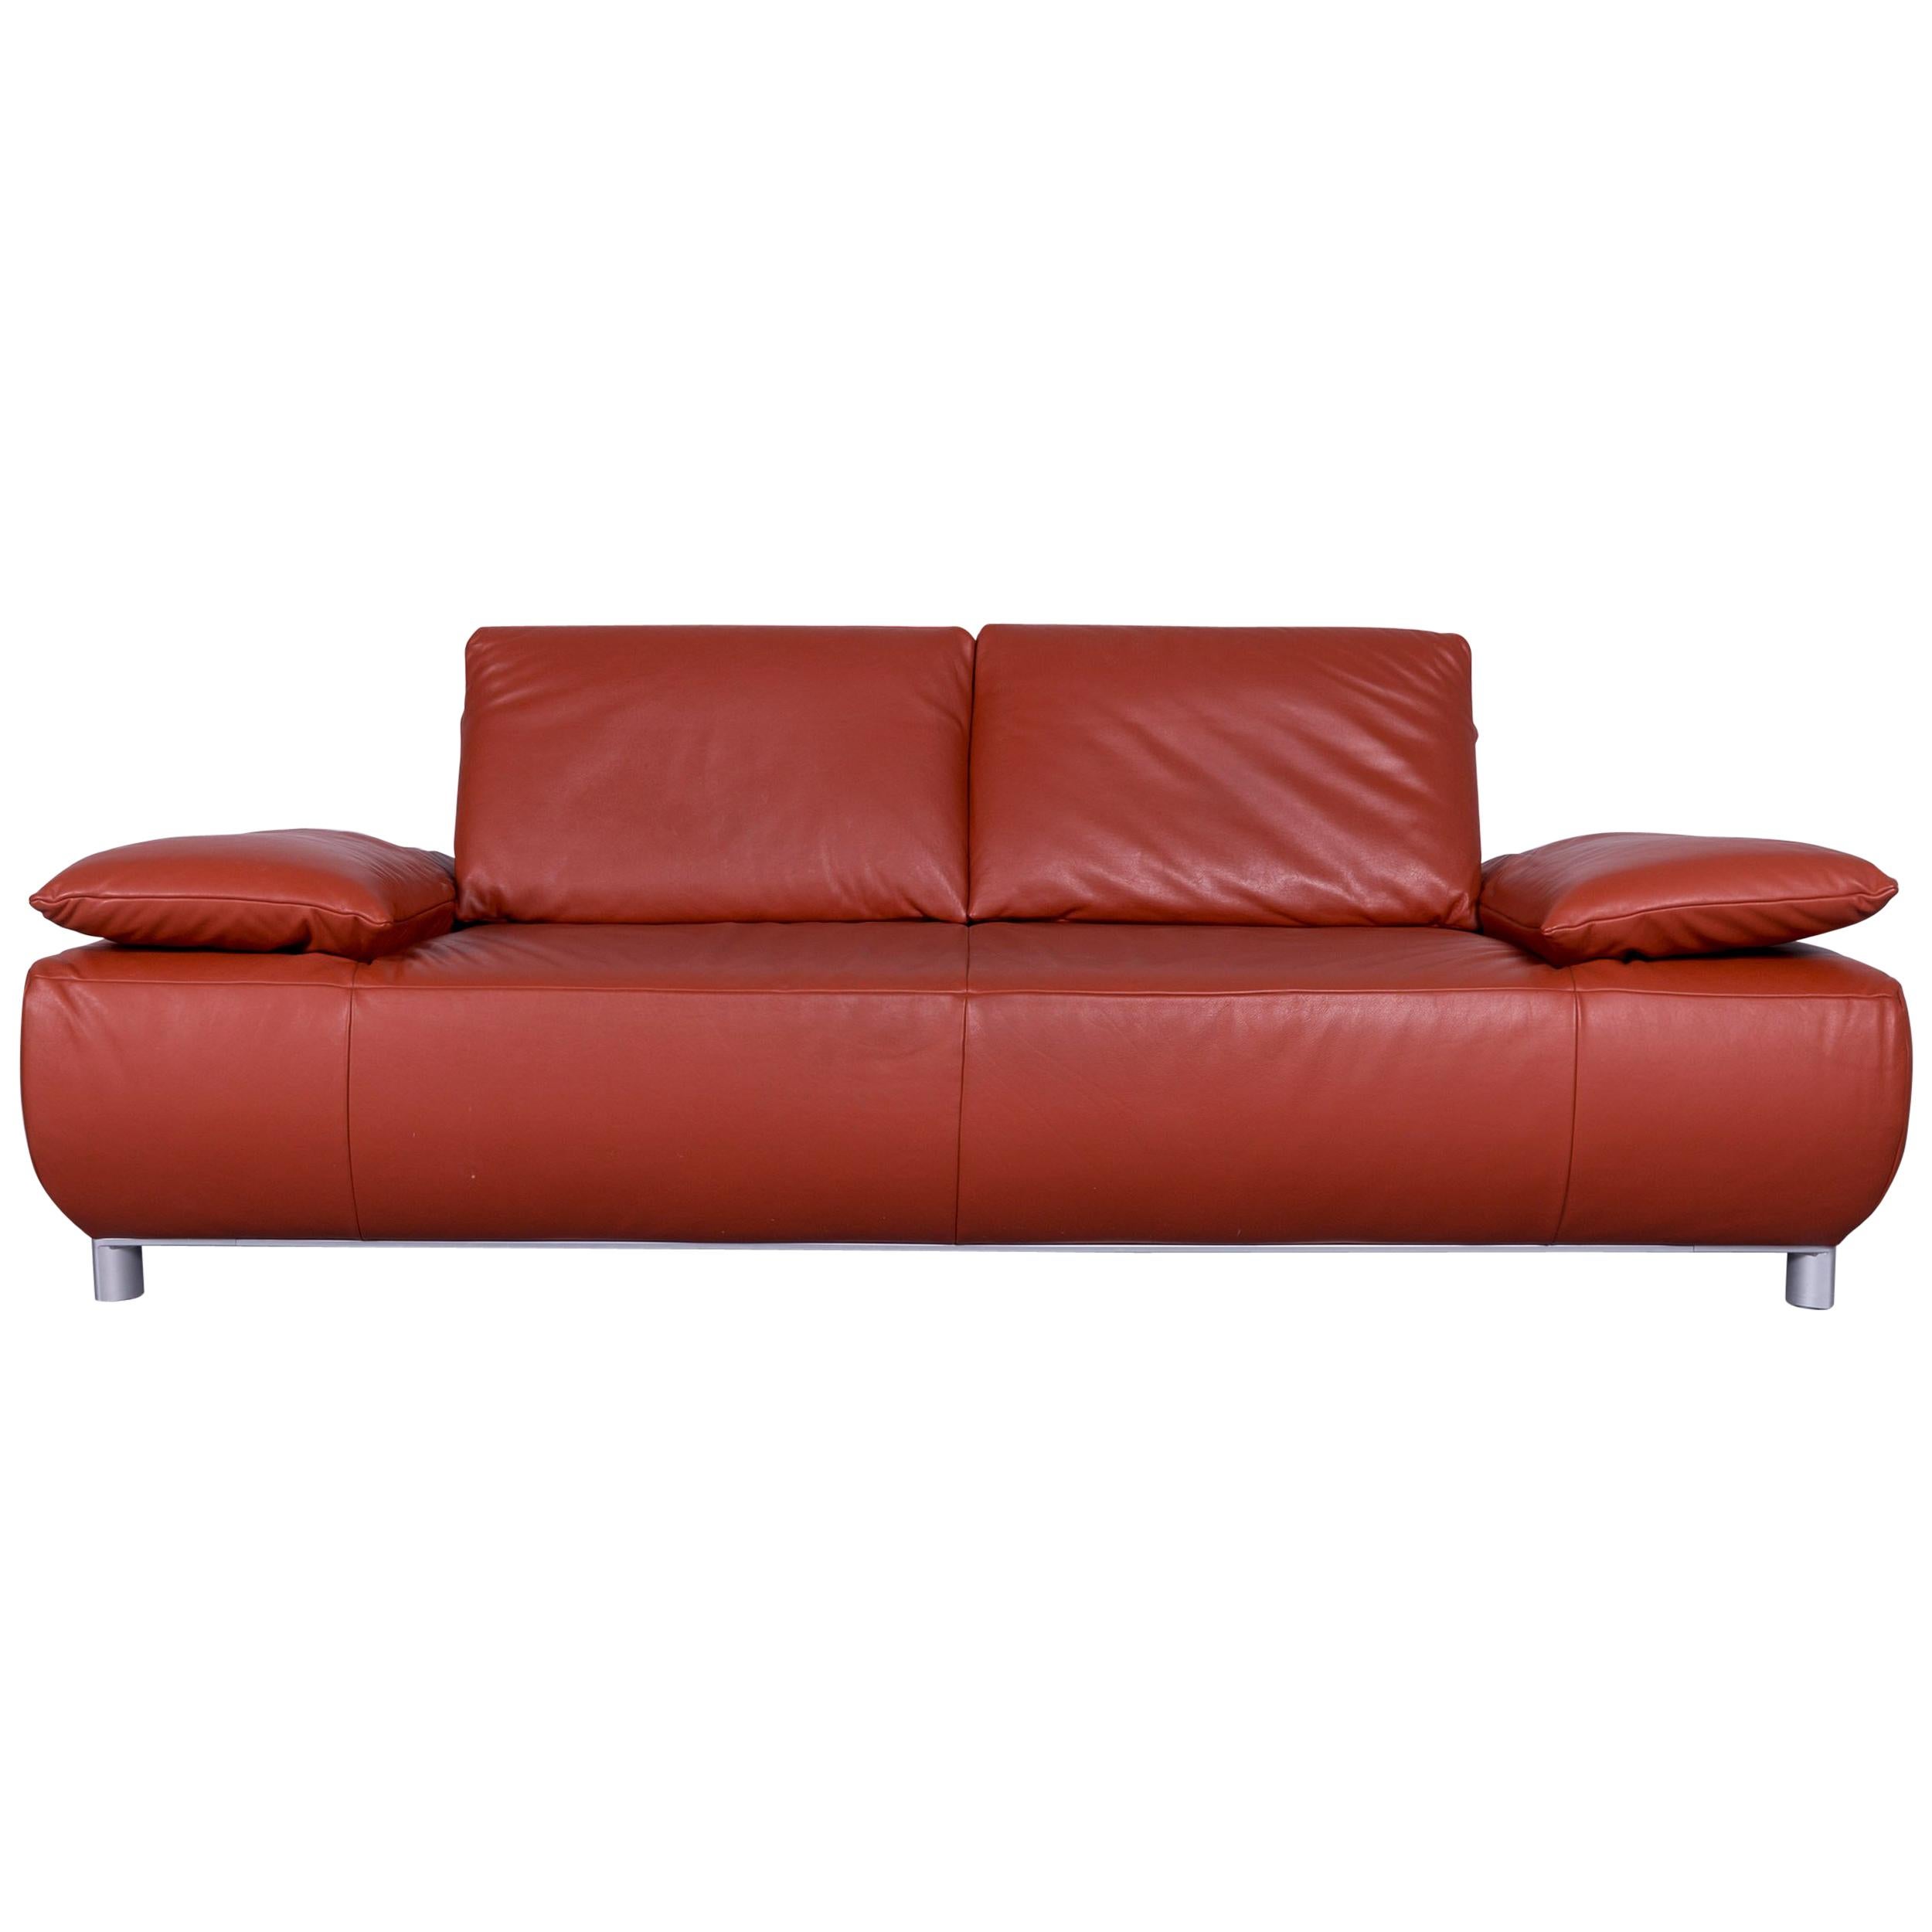 Koinor Volare Designer Leather Sofa Red Three-Seat Couch with Function For Sale